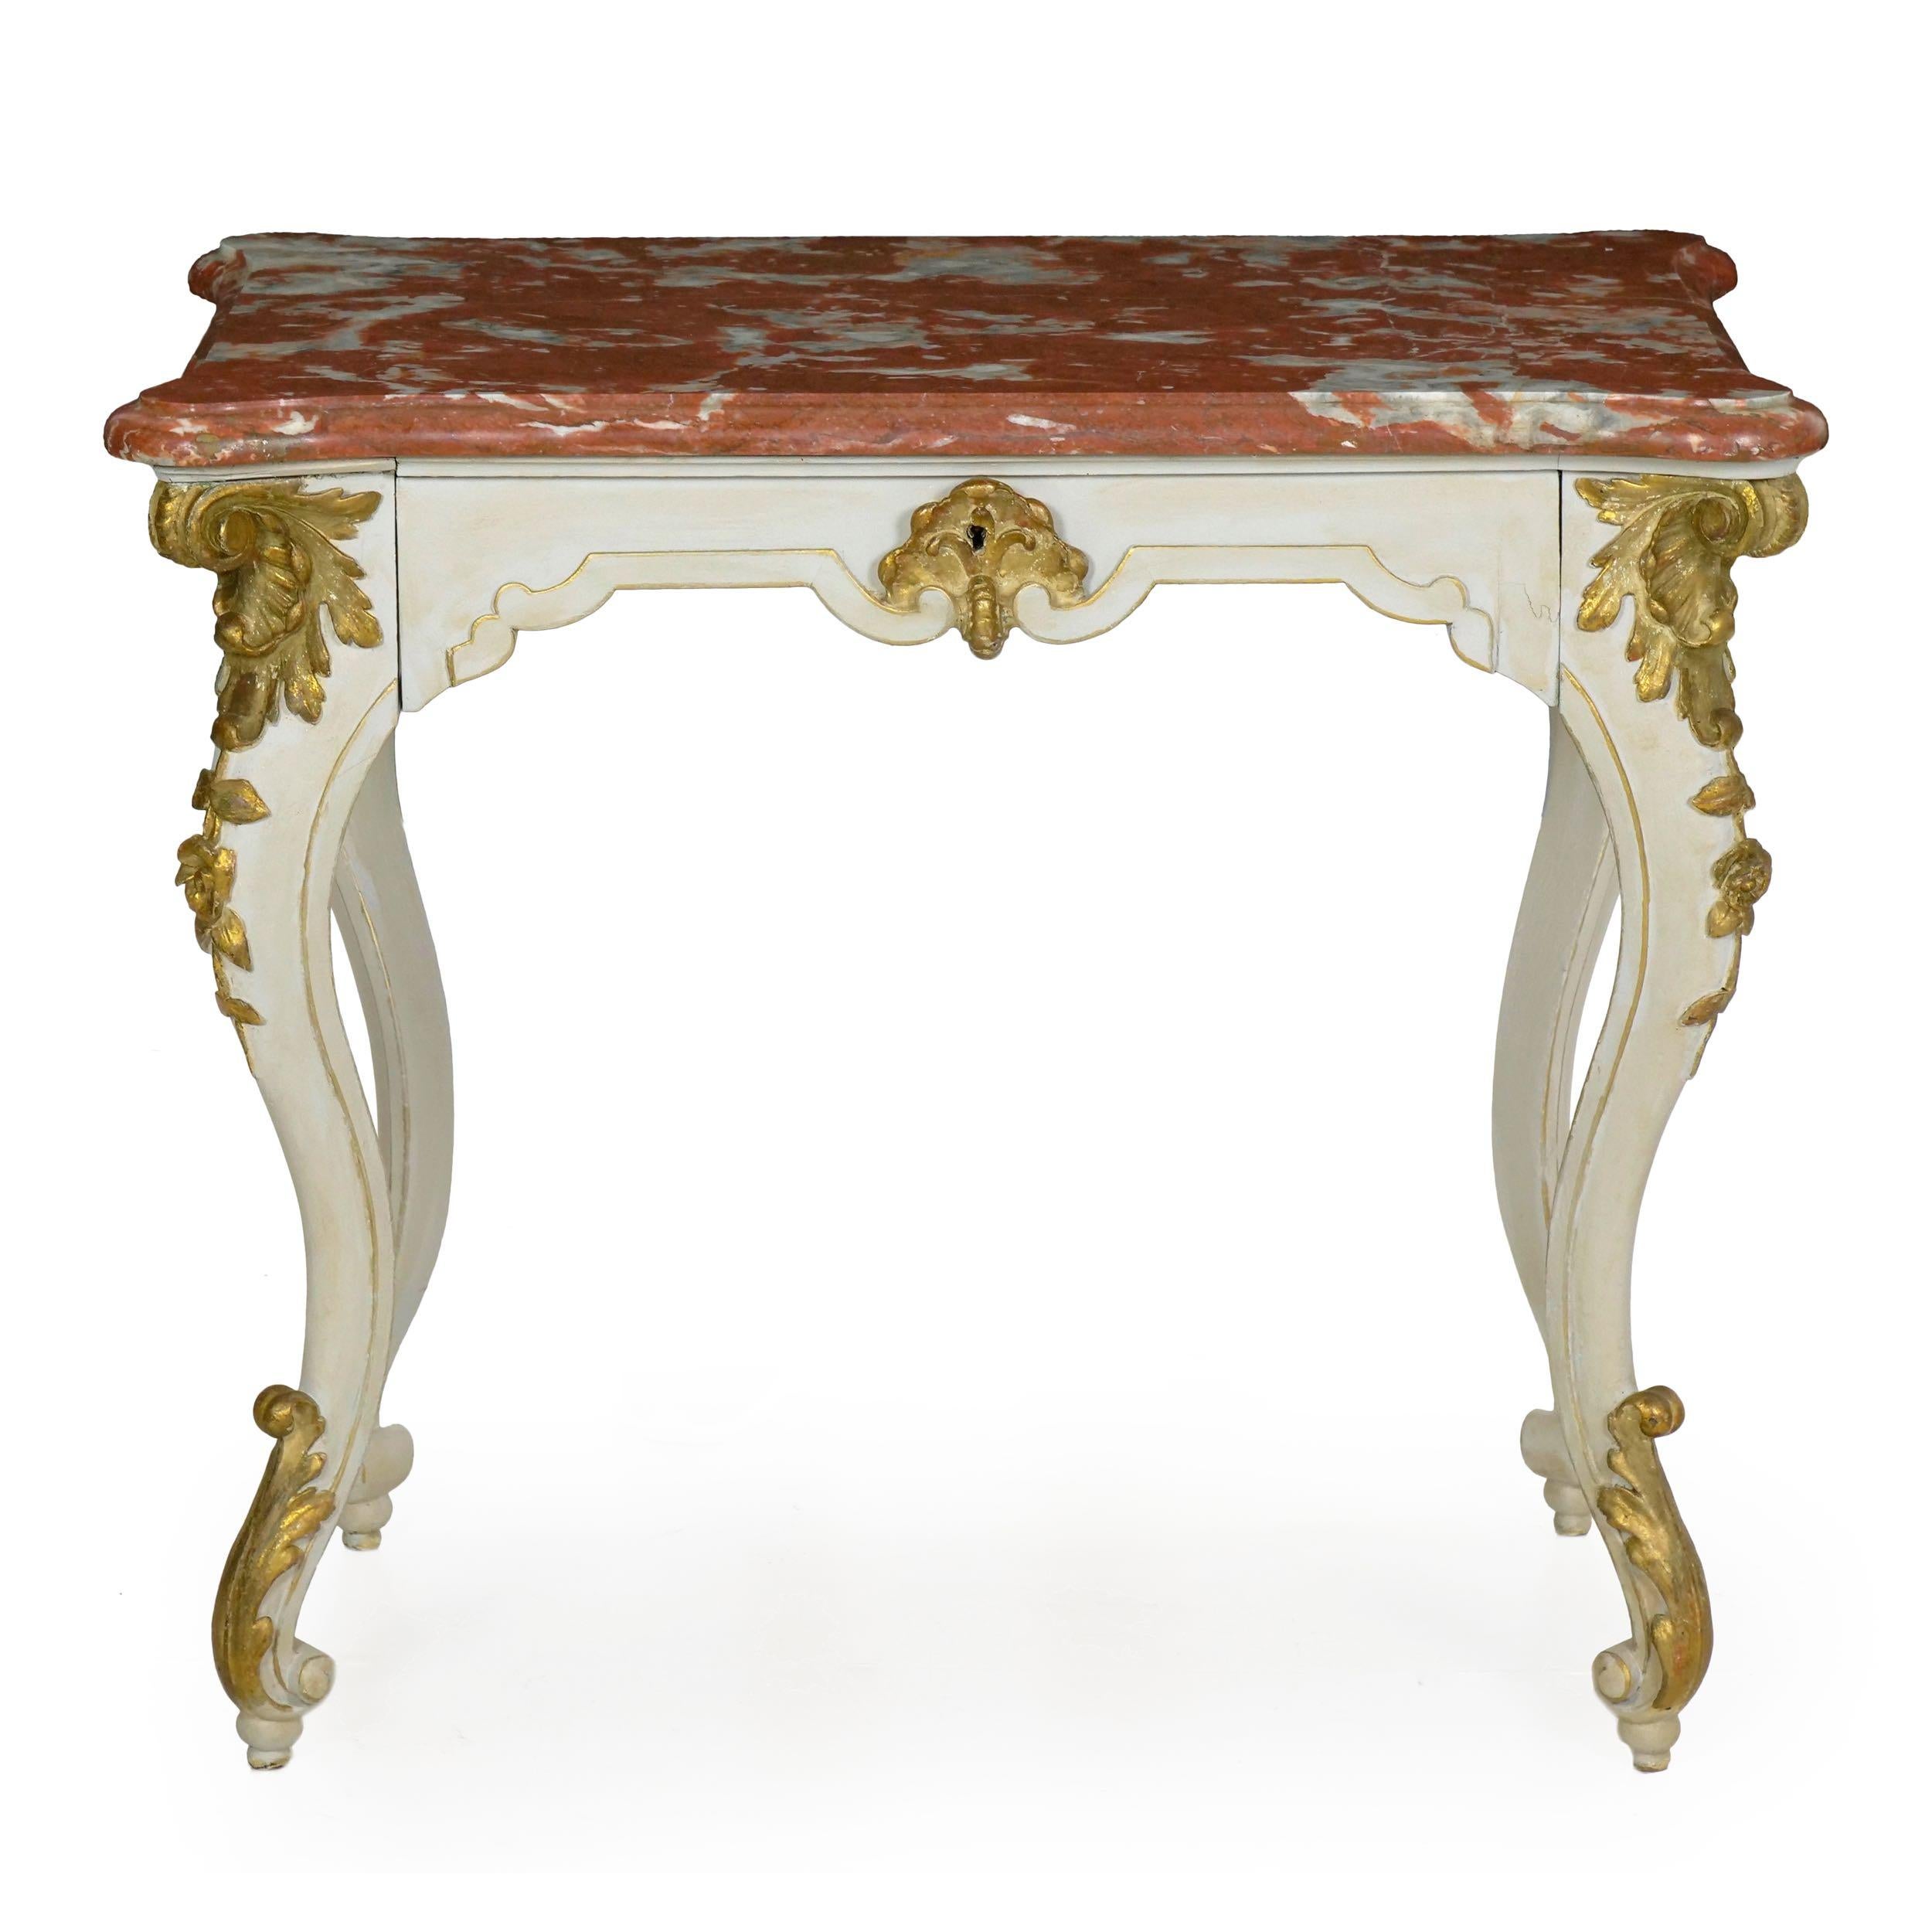 A playful piece full of life and movement, this gorgeous console table has great personality in its exaggerated form. The thick rouge marble top is beautifully curved to conform to the table, the corners with large turrets, 19th century.

Influenced